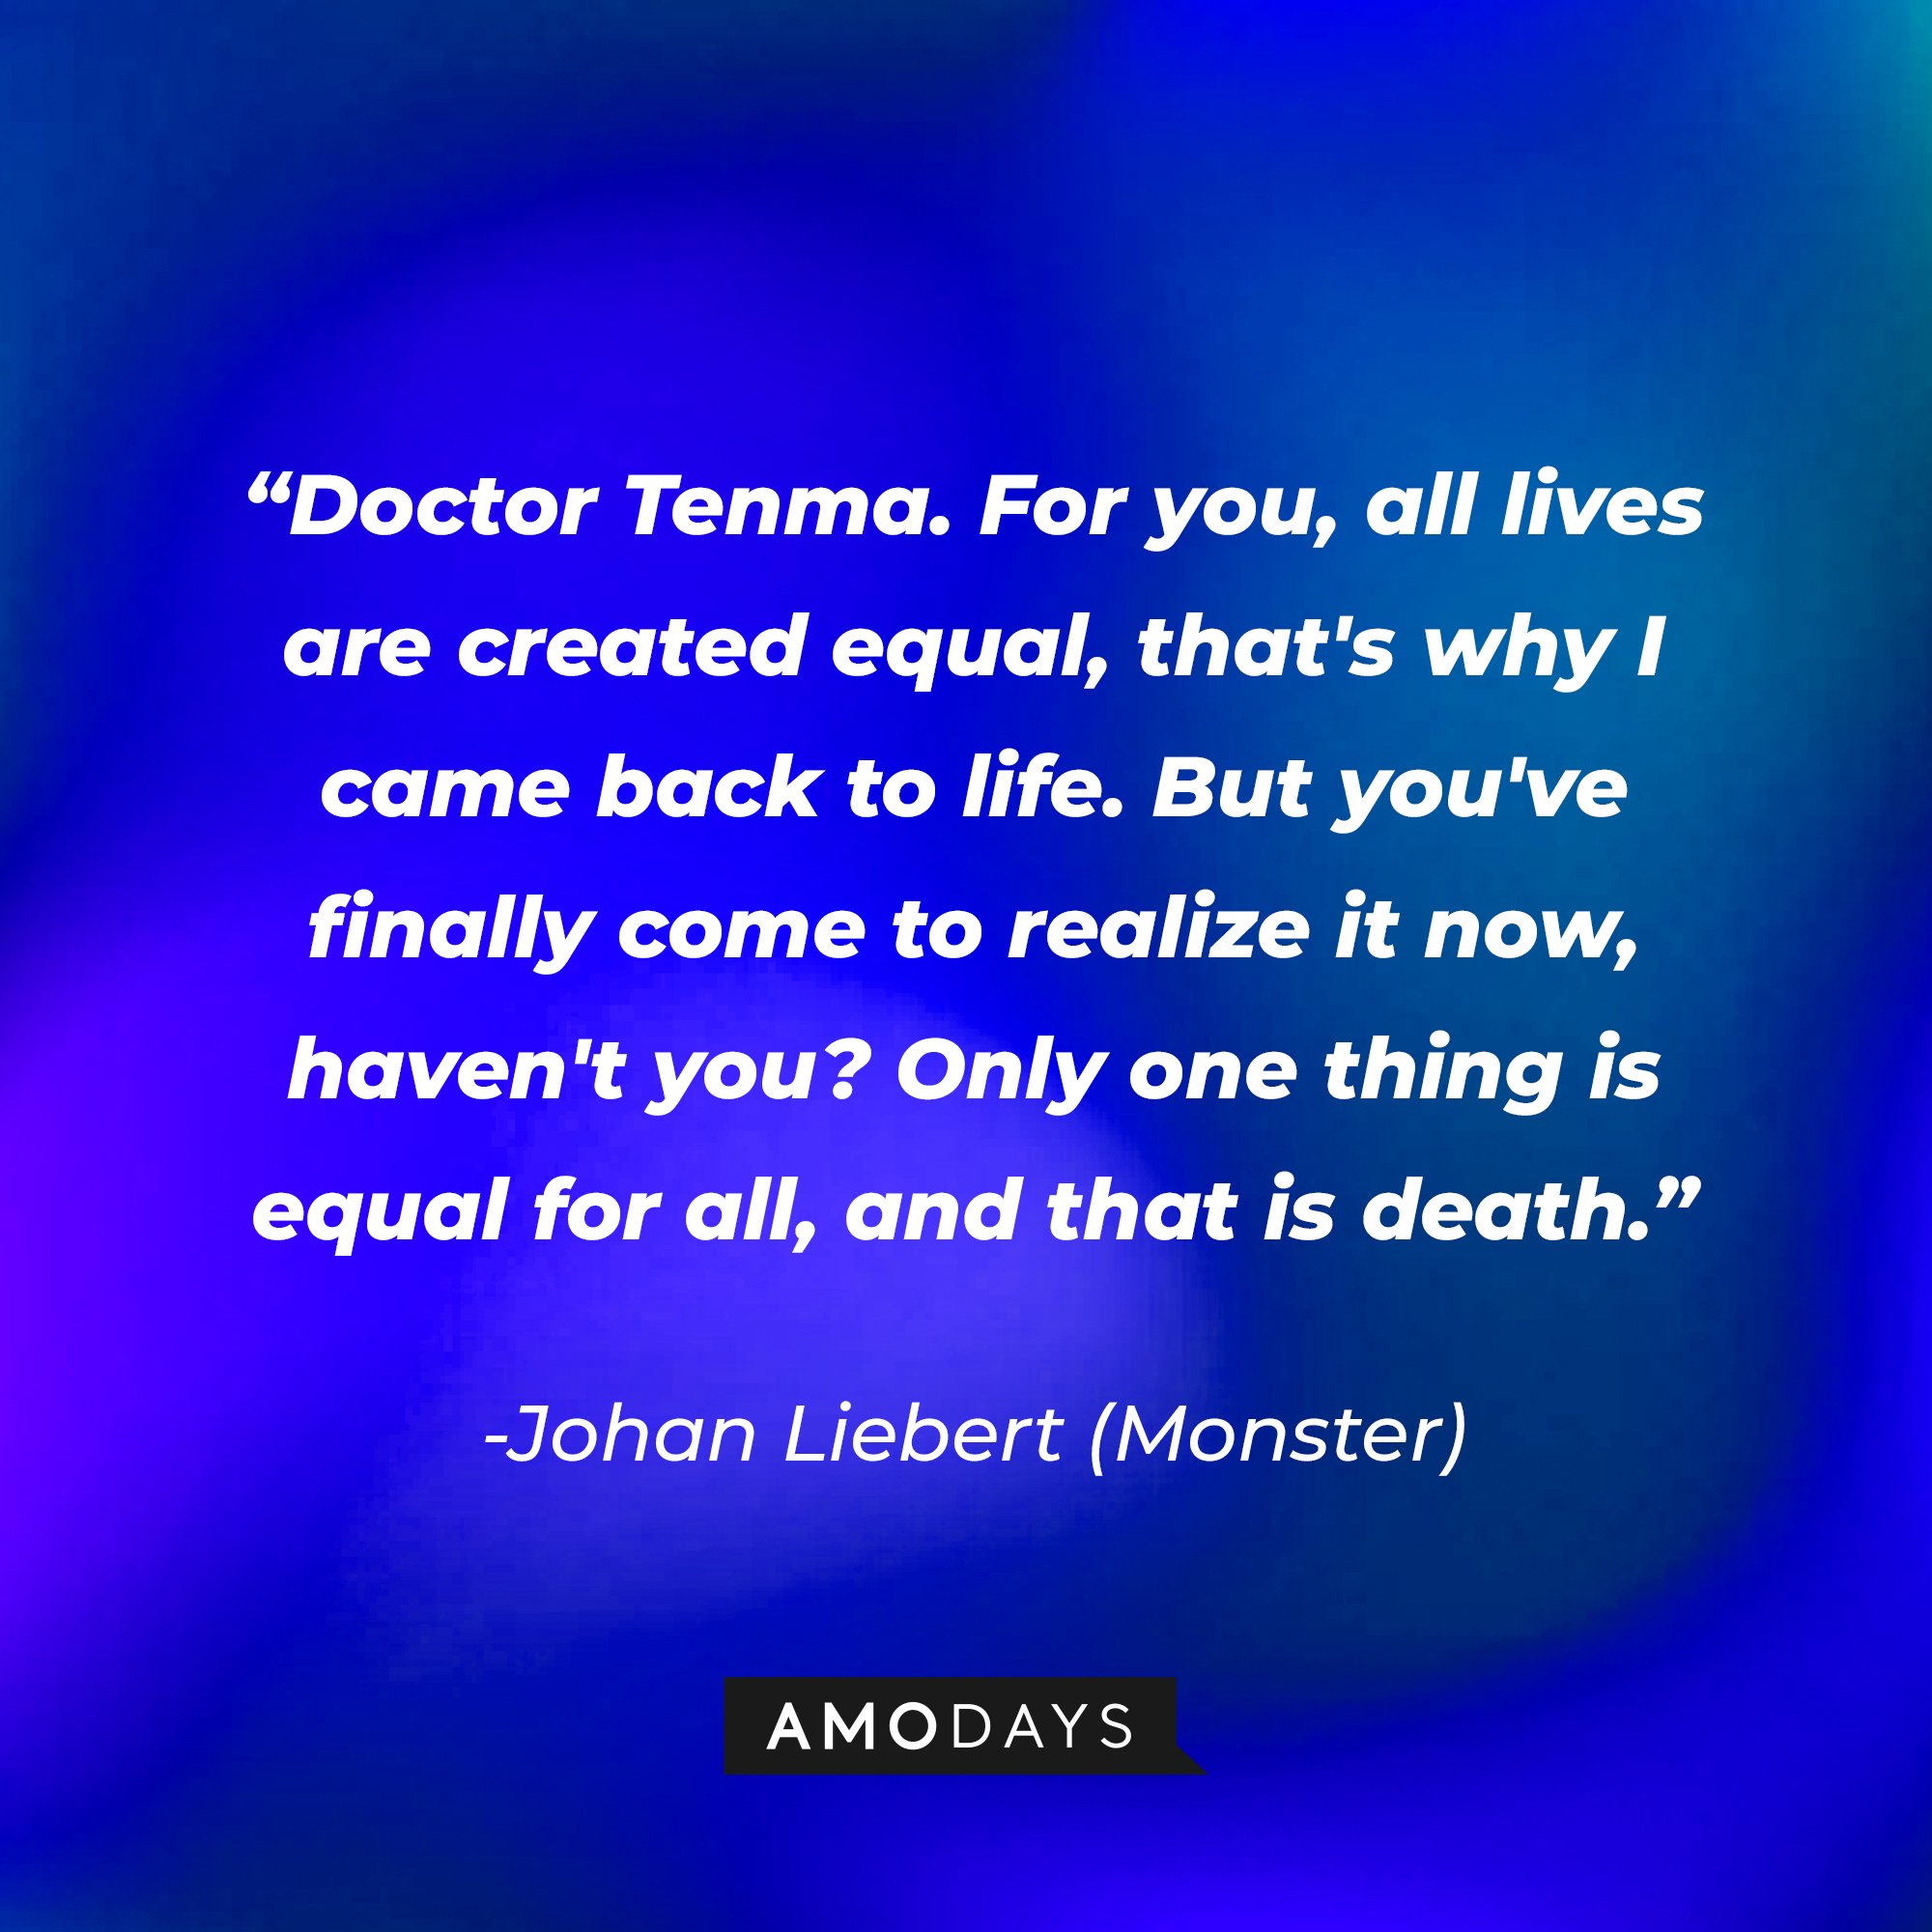 Johan Liebert's quote: "Doctor Tenma. For you, all lives are created equal, that's why I came back to life. But you've finally come to realize it now, haven't you? Only one thing is equal for all, and that is death." | Source: Amodays